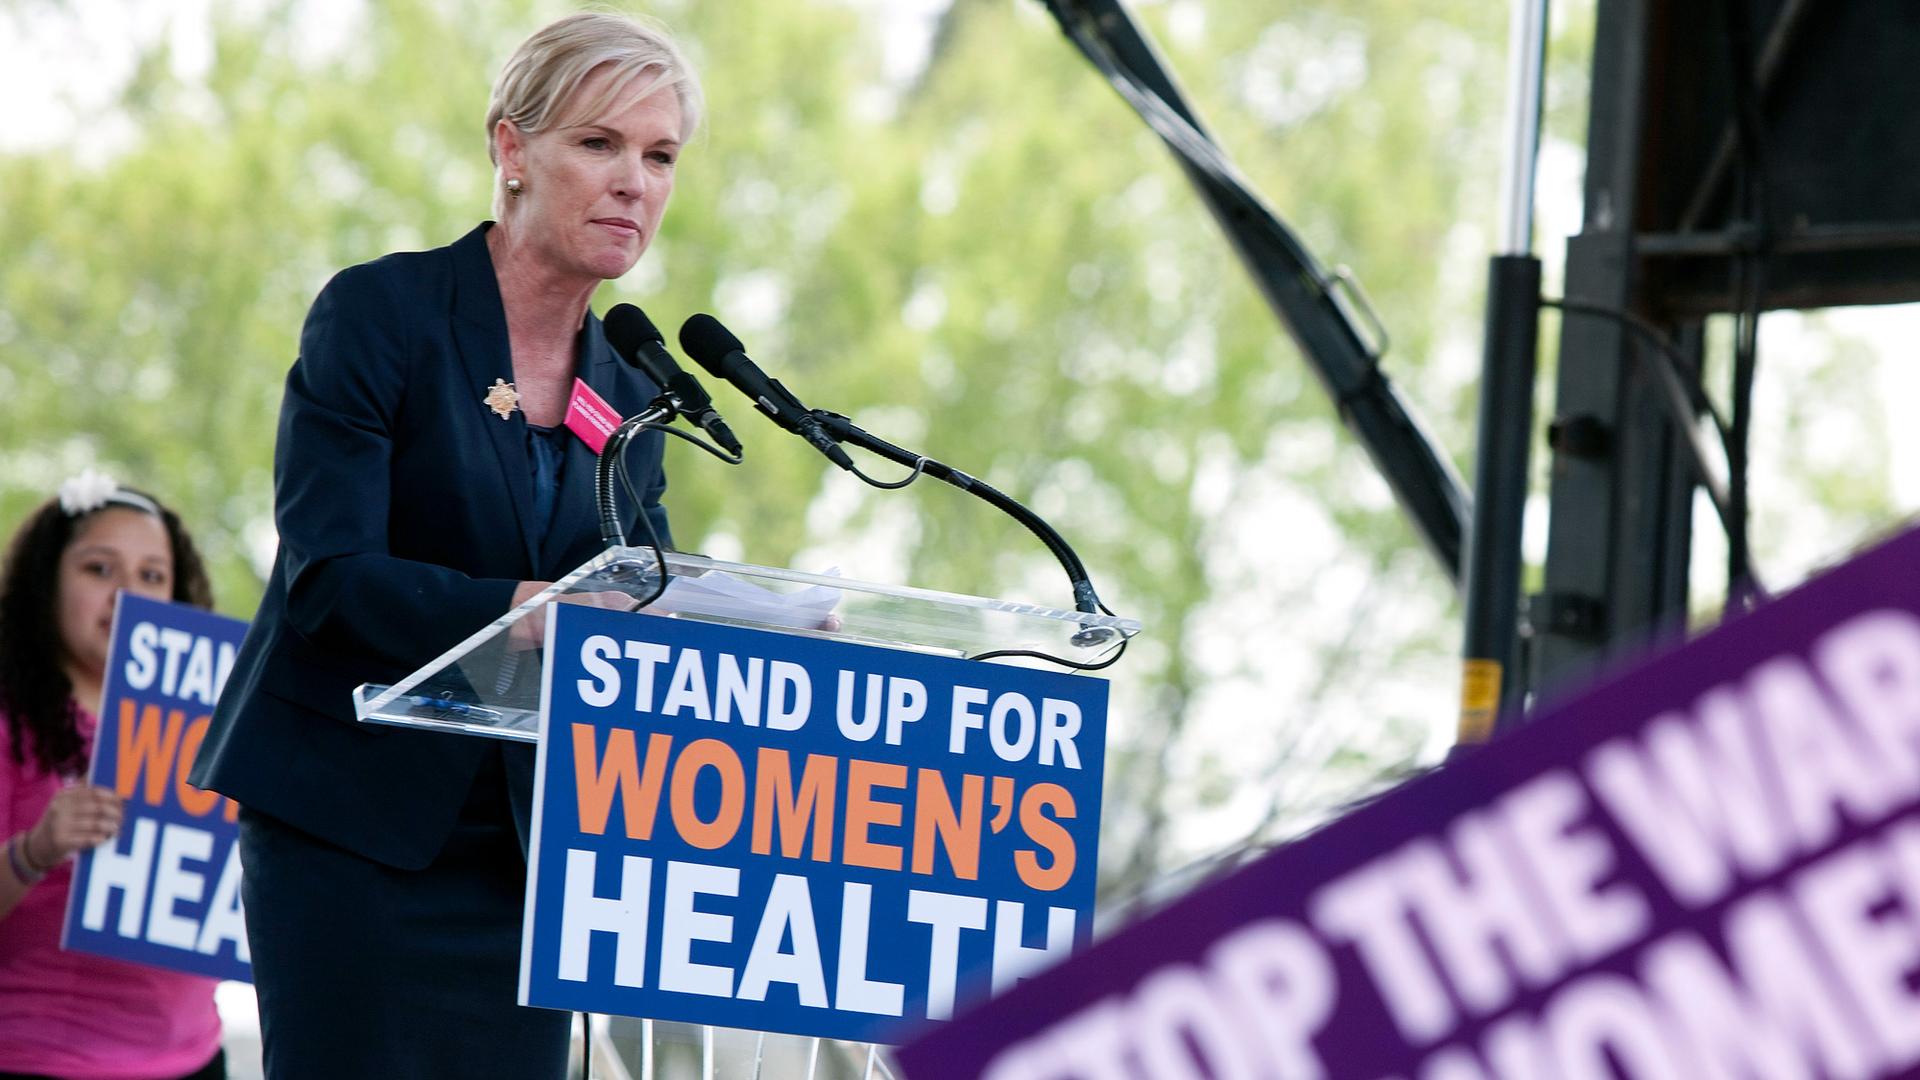 A blond woman is speaking into a microphone at a podium with a sign on the front that says "Stand up for women"